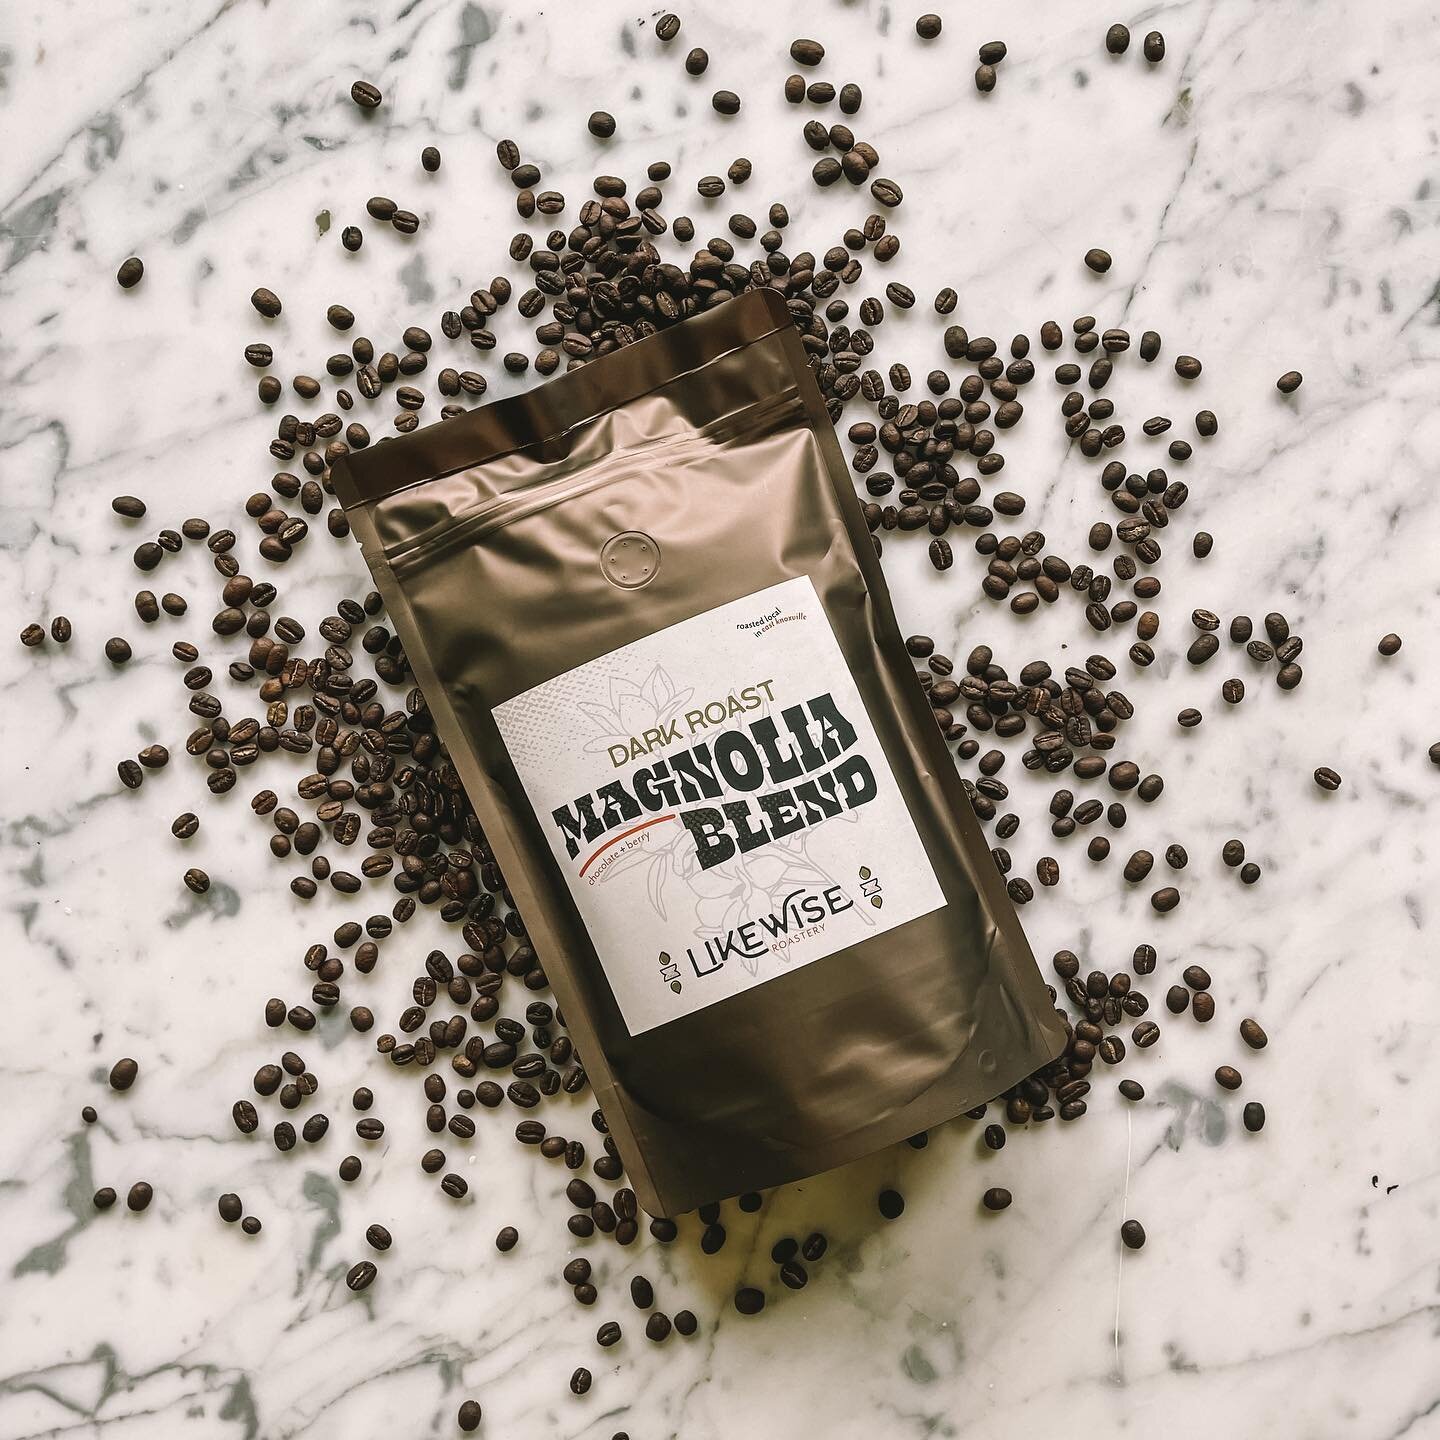 Fun fact about Likewise is that we roast our own coffee beans IN HOUSE!!! We are proud roasters for many organizations around Knoxville.

So come get a bag for yourself (and your family + friends)! 

#merch #fall #865 #tennesseecoffee #likewiseroaste